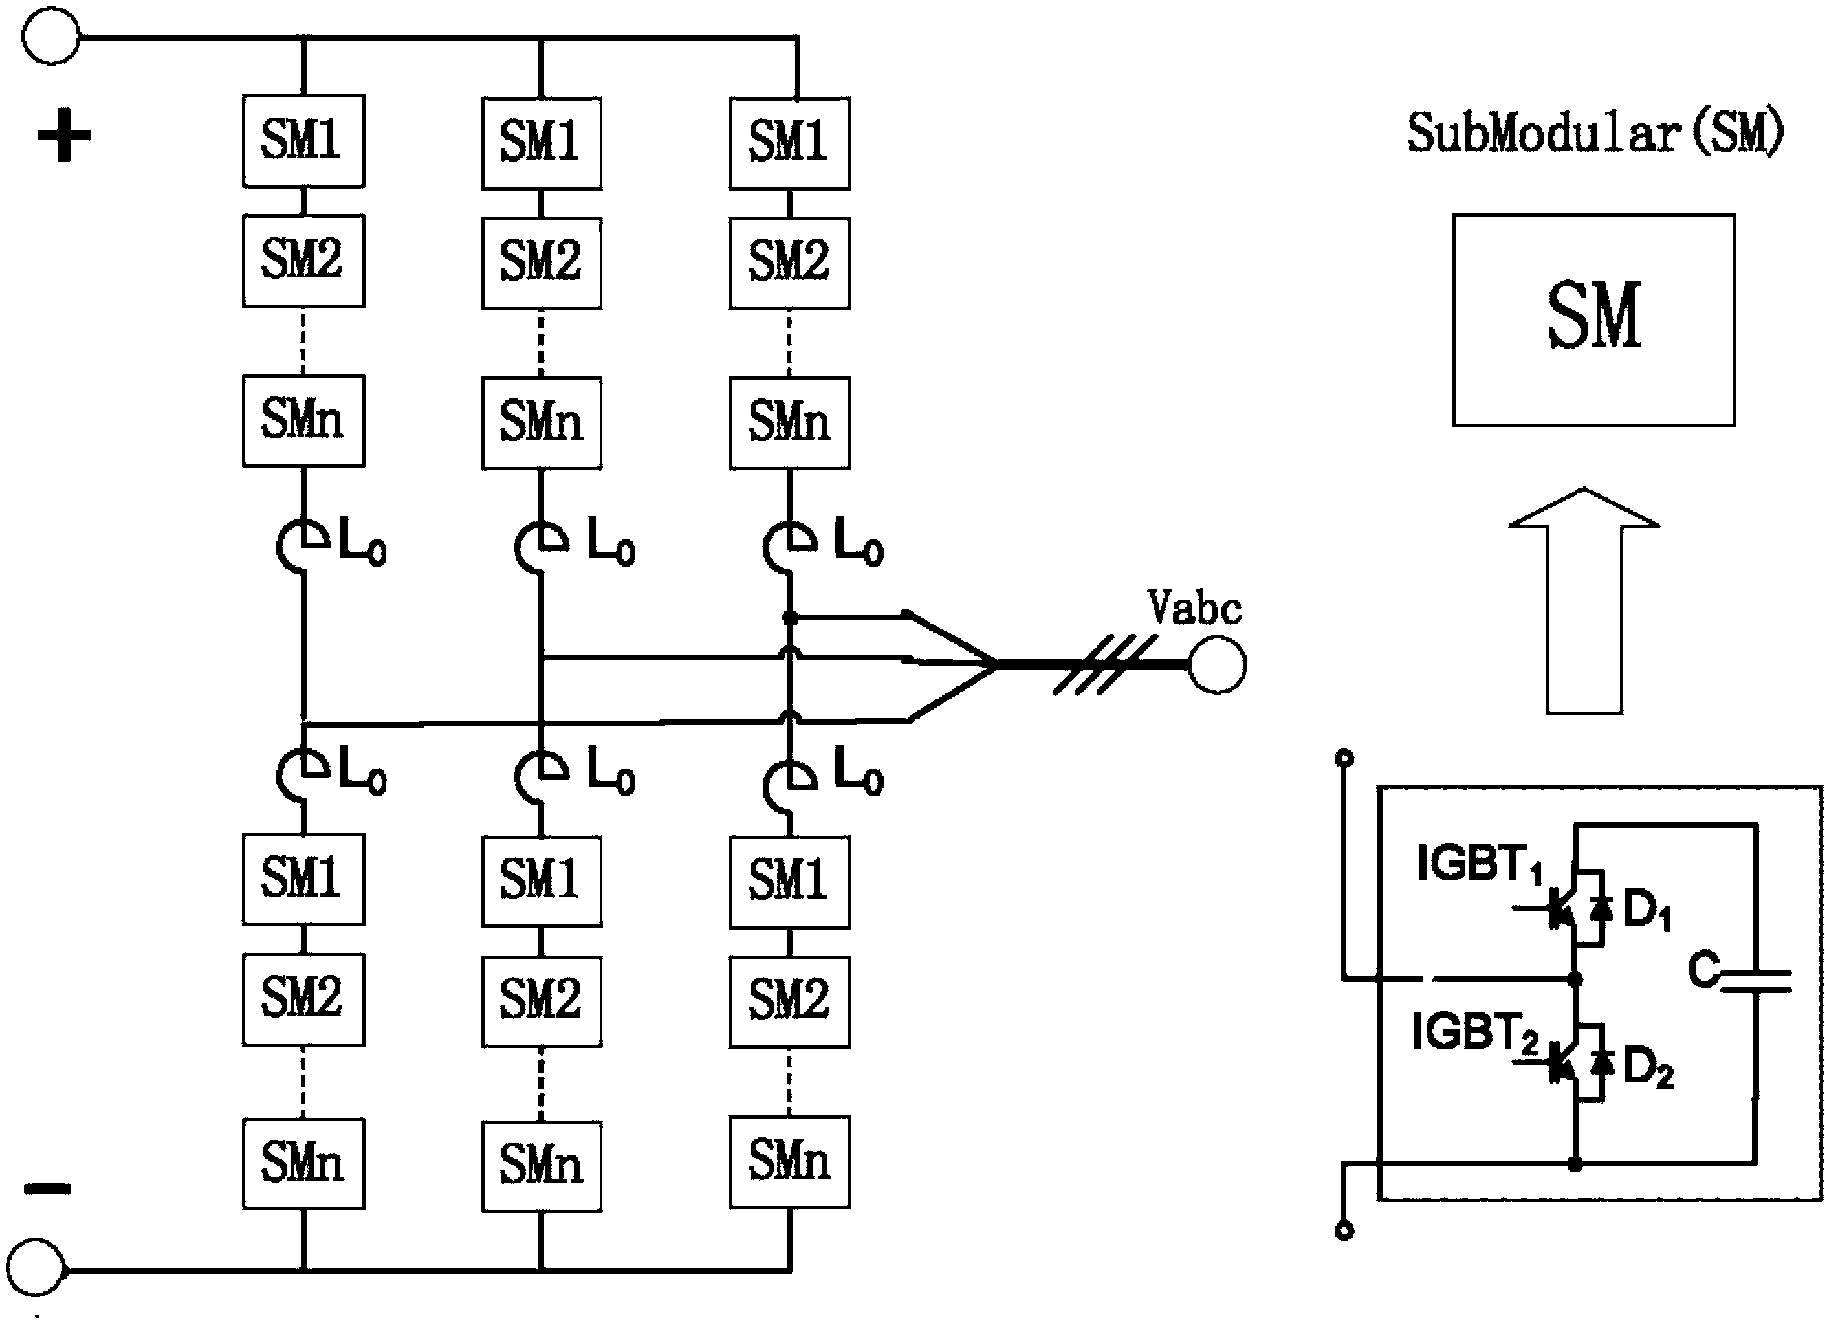 Converter for converting high-voltage direct current into alternating current